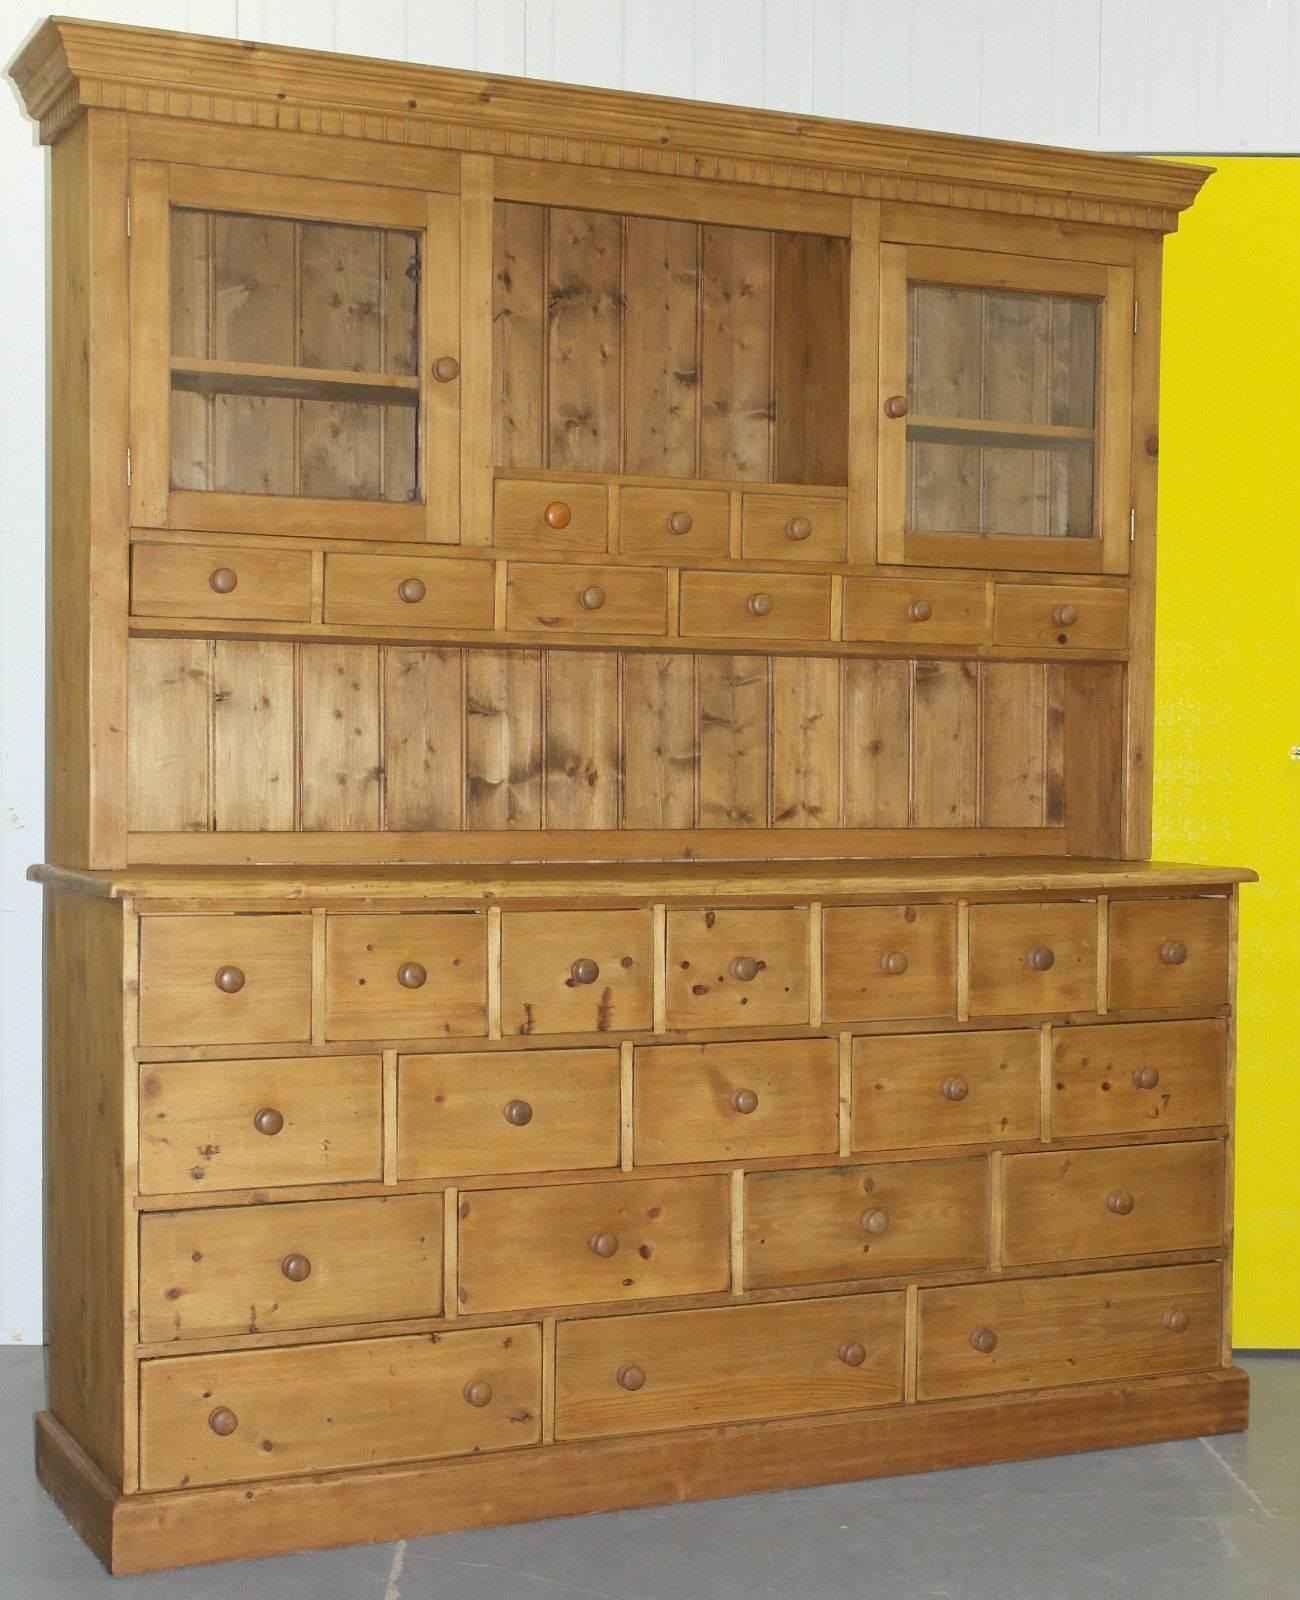 We are delighted to offer for auction this stunning antique solid pine Merchants bank of drawers / welsh dresser
 
It's very rare to find these with the original tops, in the 1950s everyone was destroying them and keeping the bases to use as